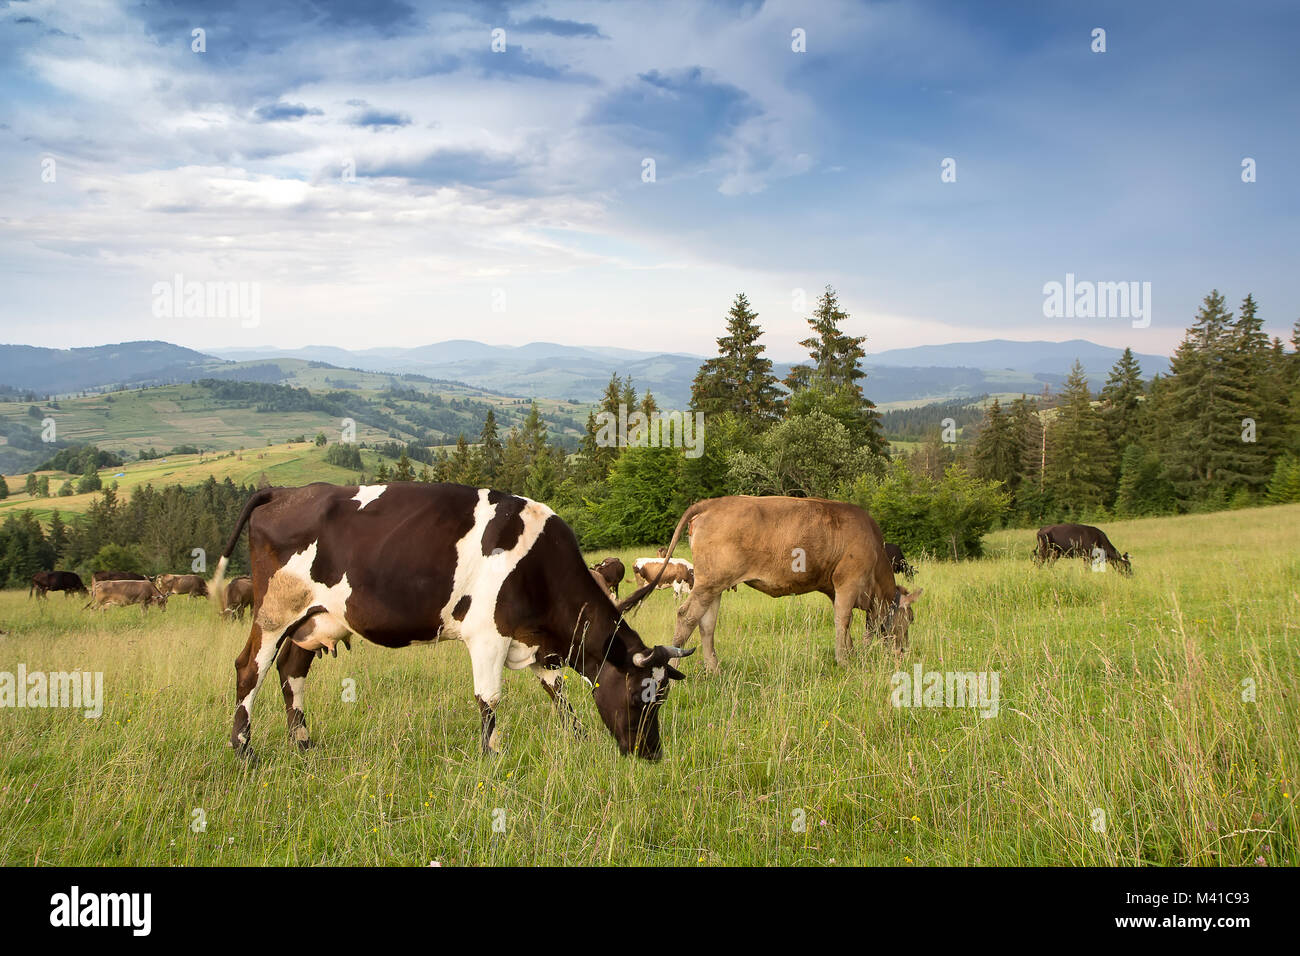 A herd of cows grazing in a grassland in a mountainous area Stock Photo